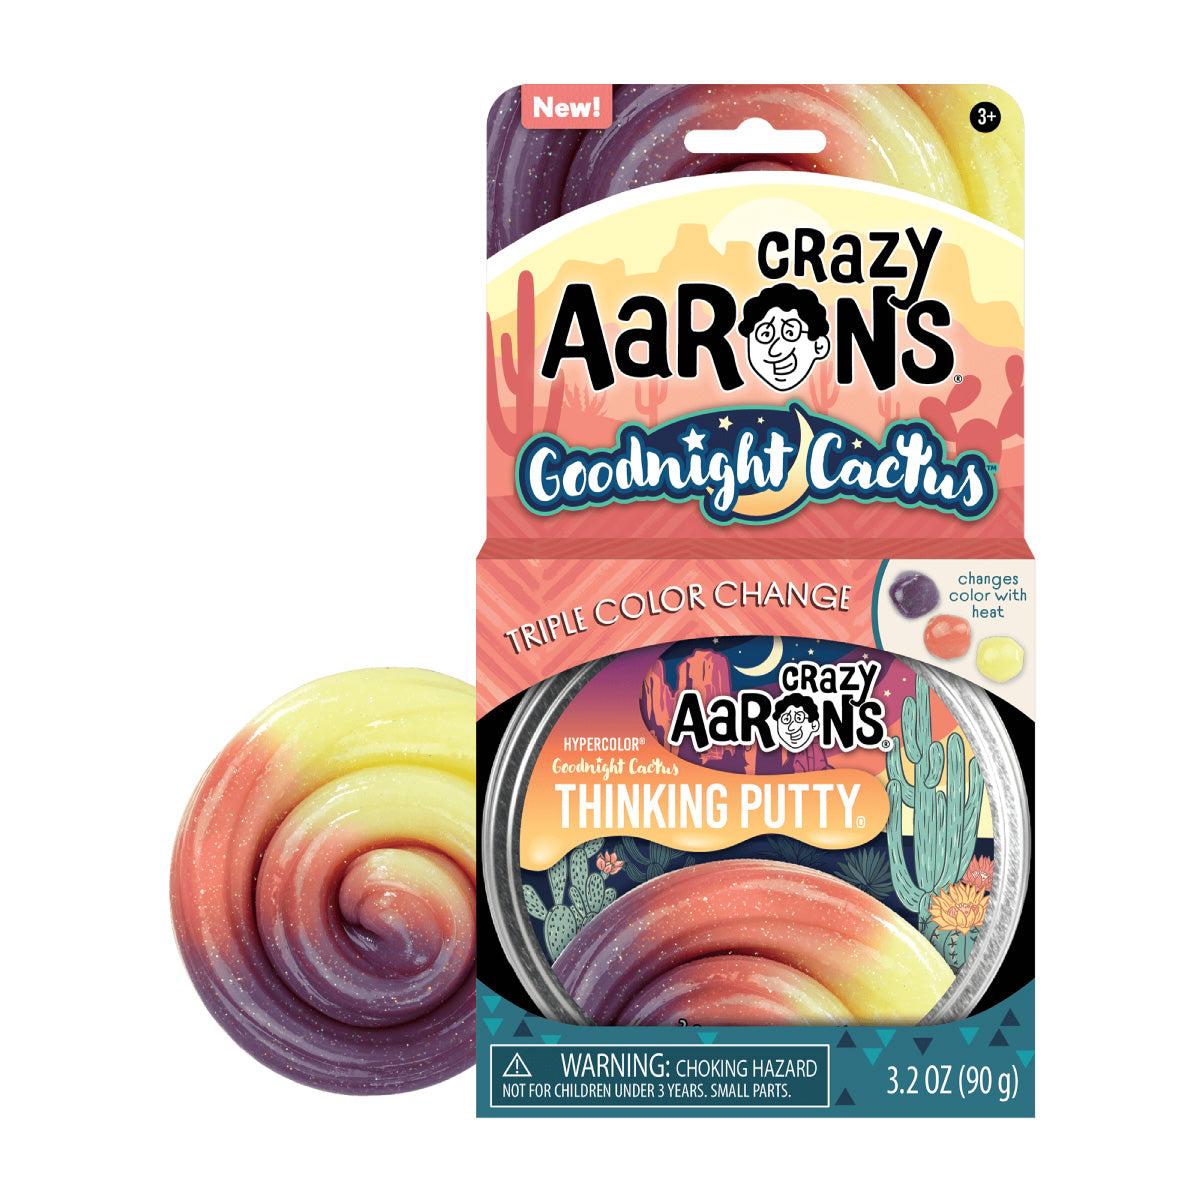 Crazy Aaron's Goodnight Cactus Hypercolor Thinking Putty